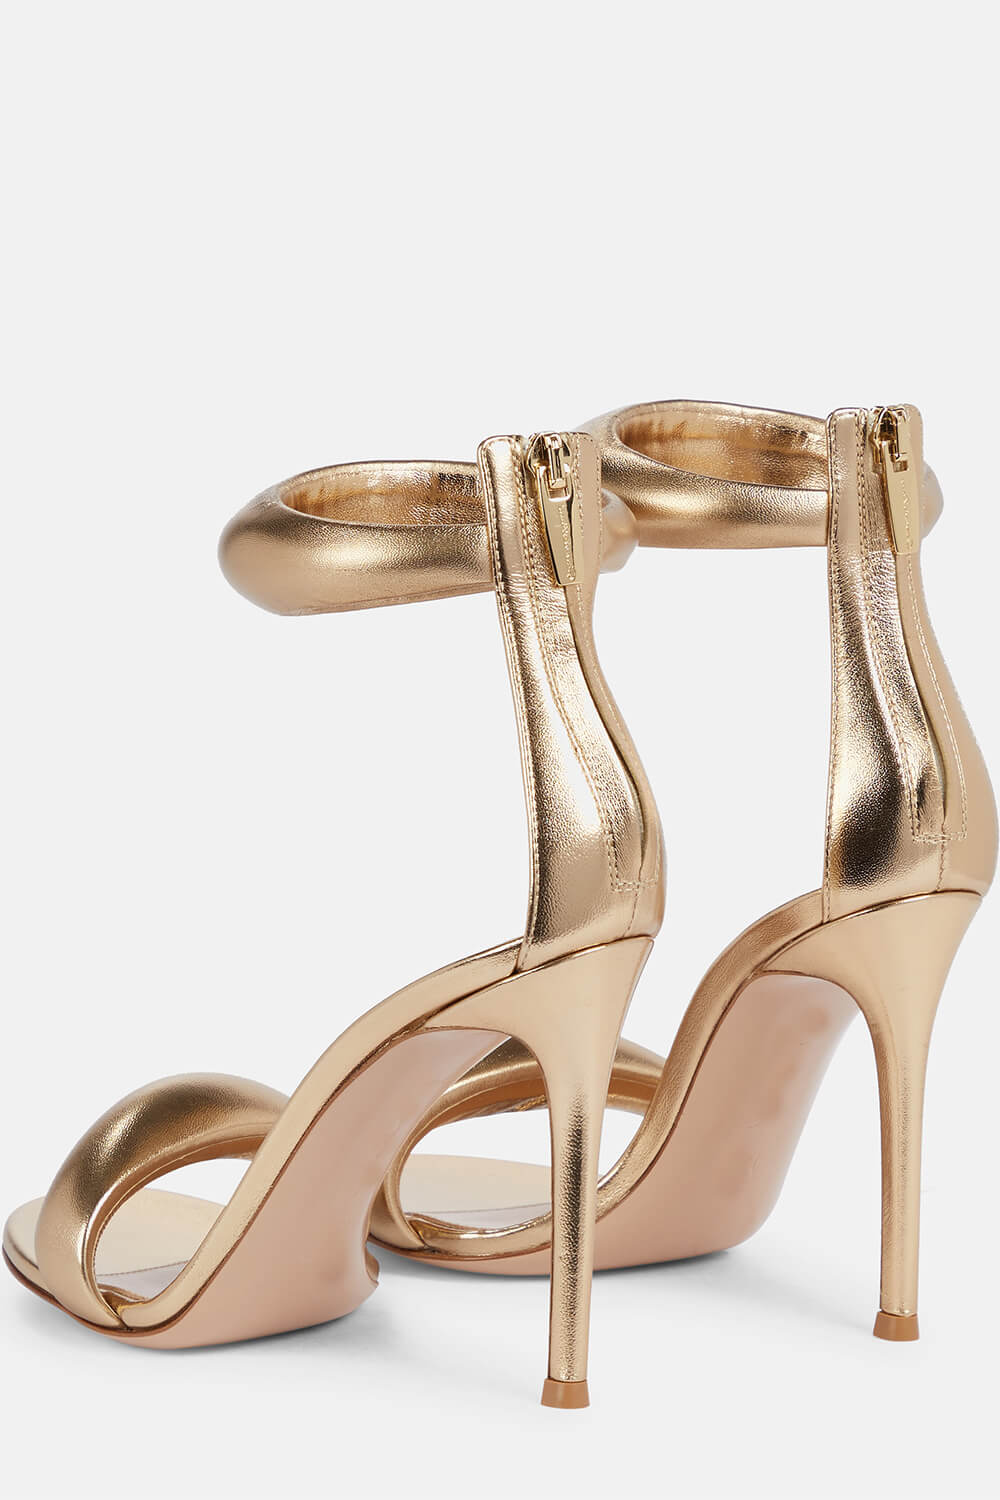 20 Rose Gold Shoes That Are Perfect for Your Wedding Look | Tacones,  Zapatos, Ropa de moda